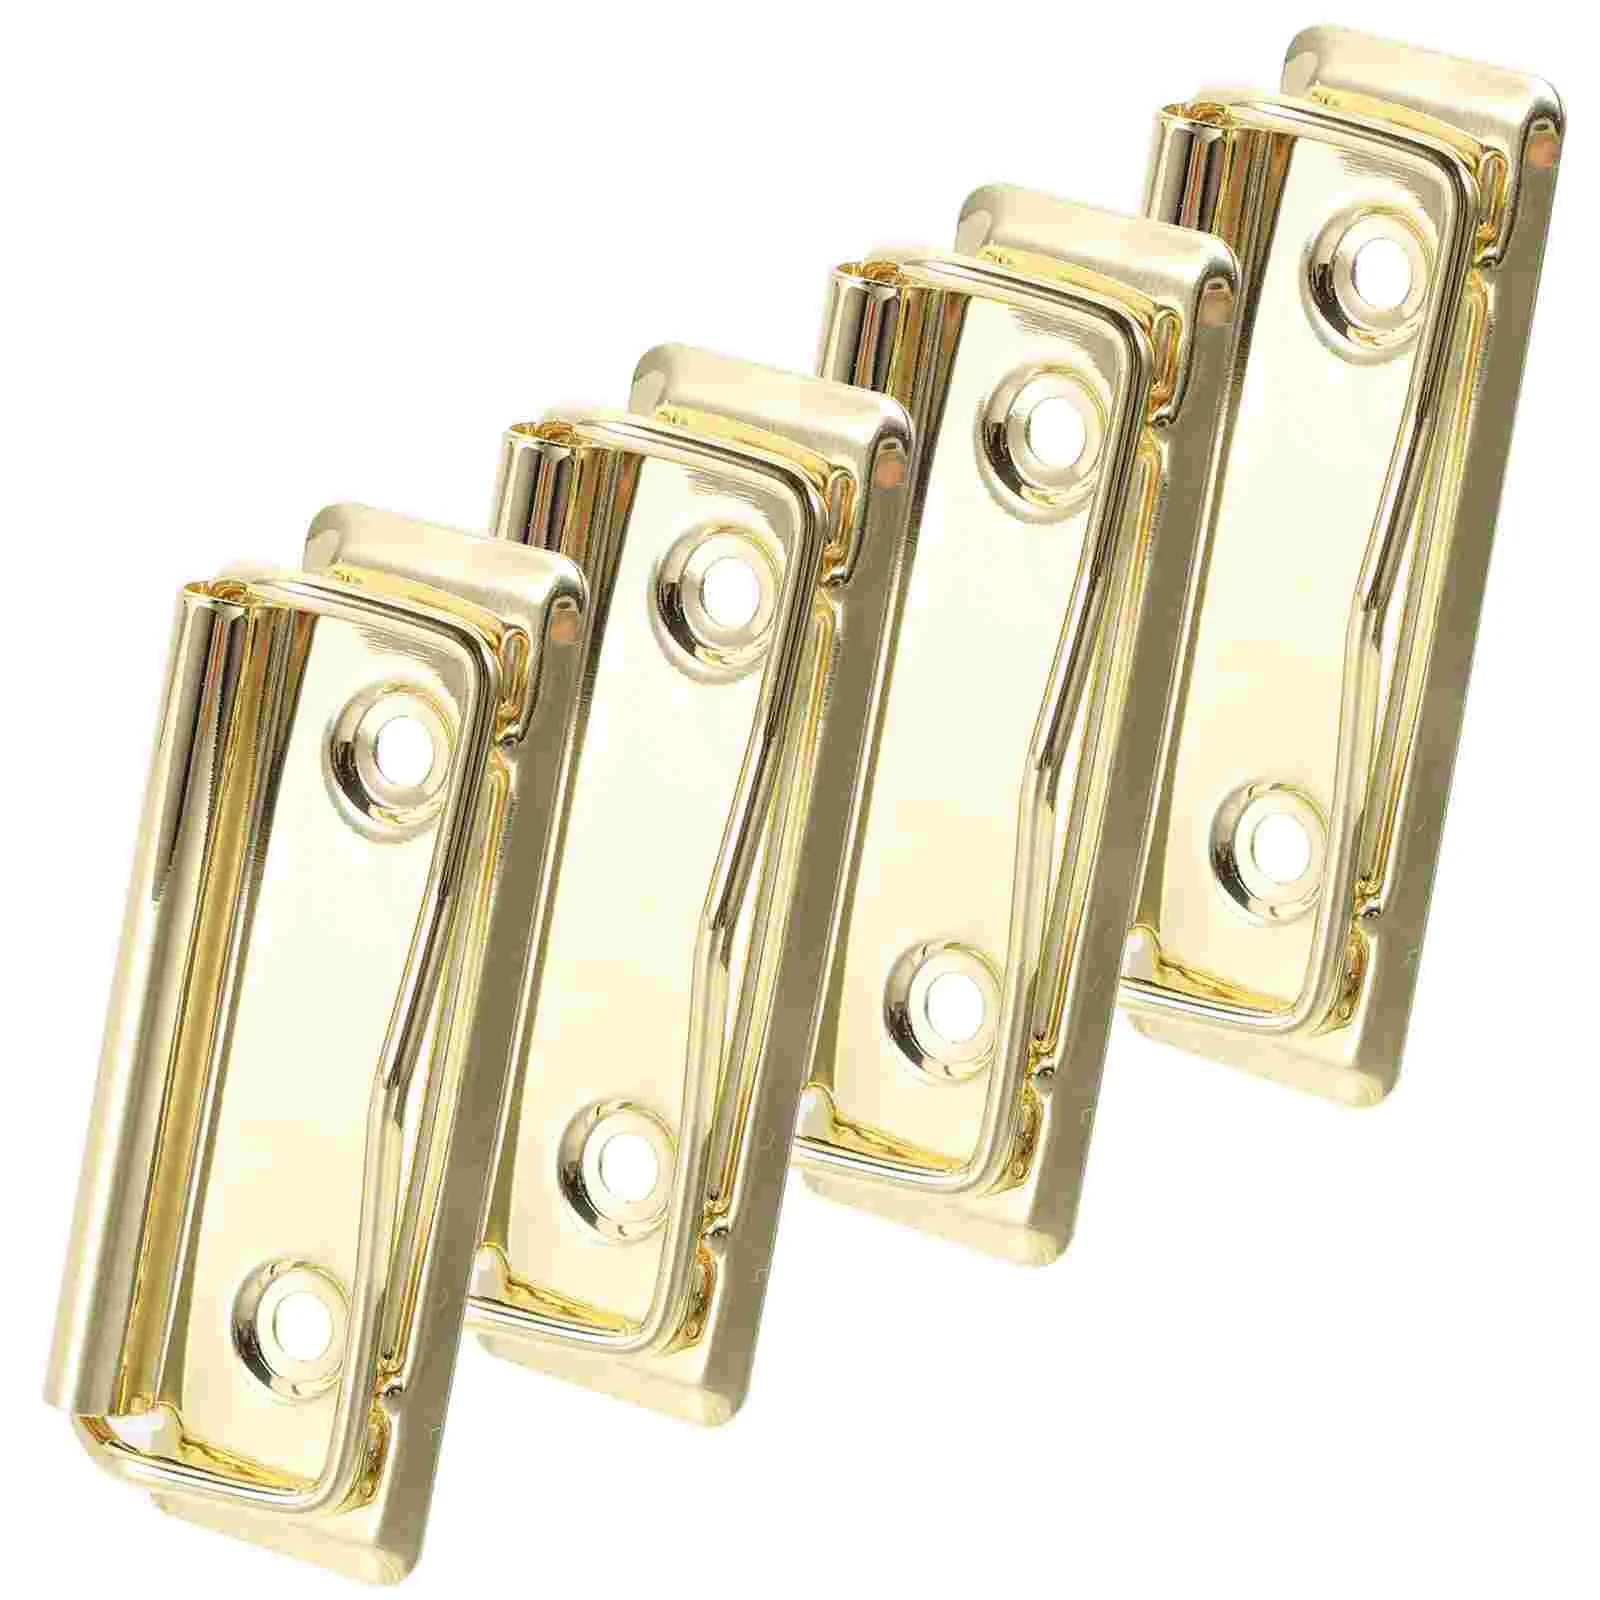 

4Pcs Binder Clips Metal Clipboard Clips Write Board Clips Metal Scrapbook Clips for Replace